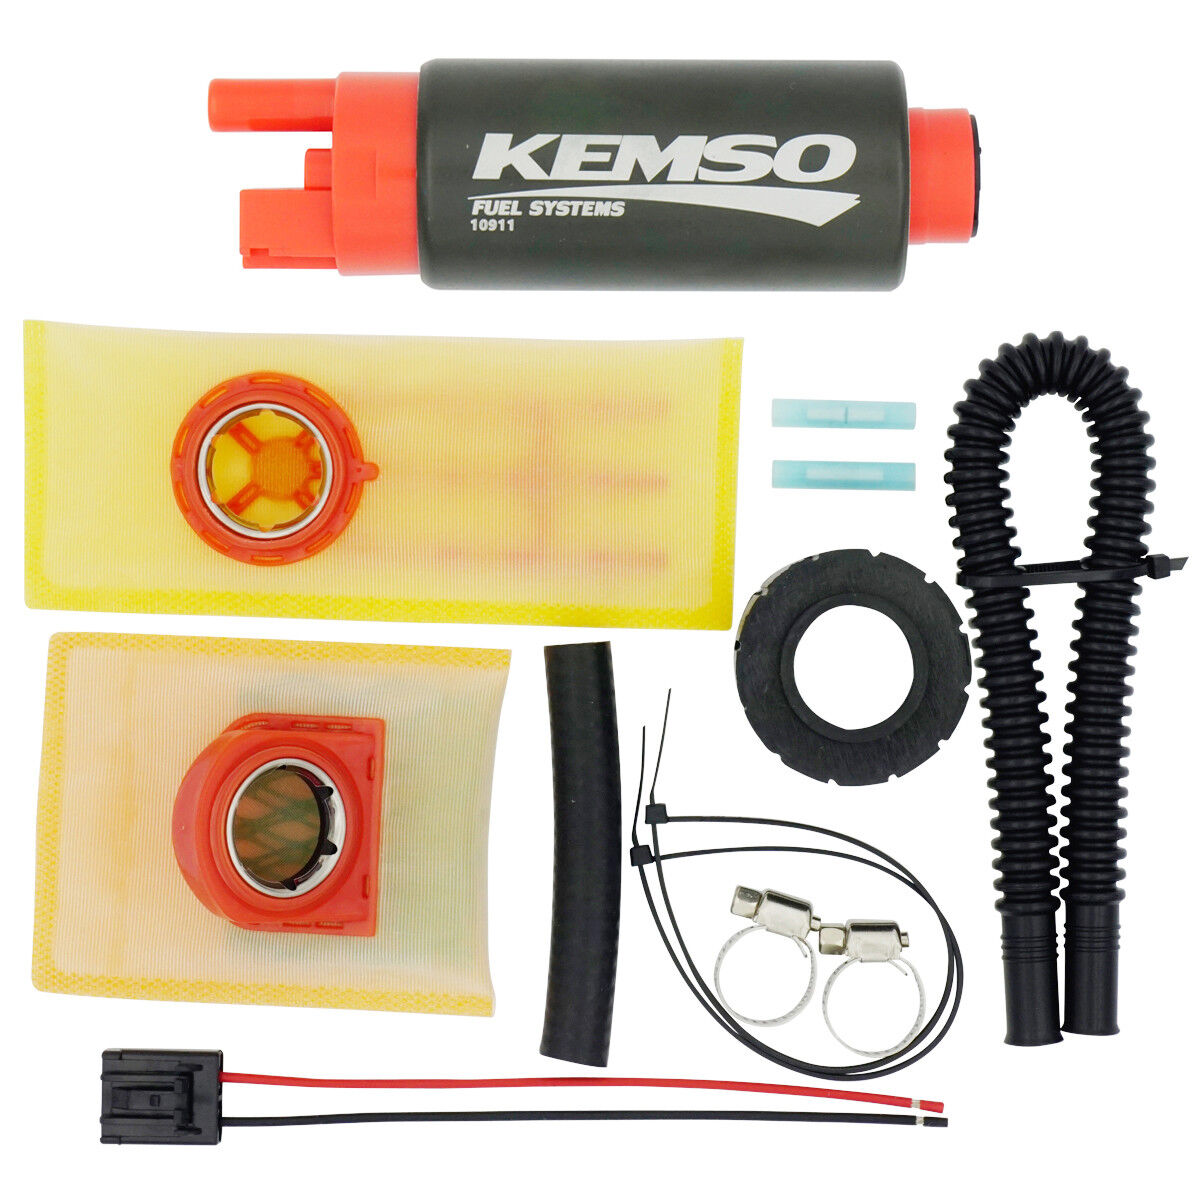 KEMSO 340LPH High Performance Fuel Pump for Dodge Shelby Charger 1985-1987